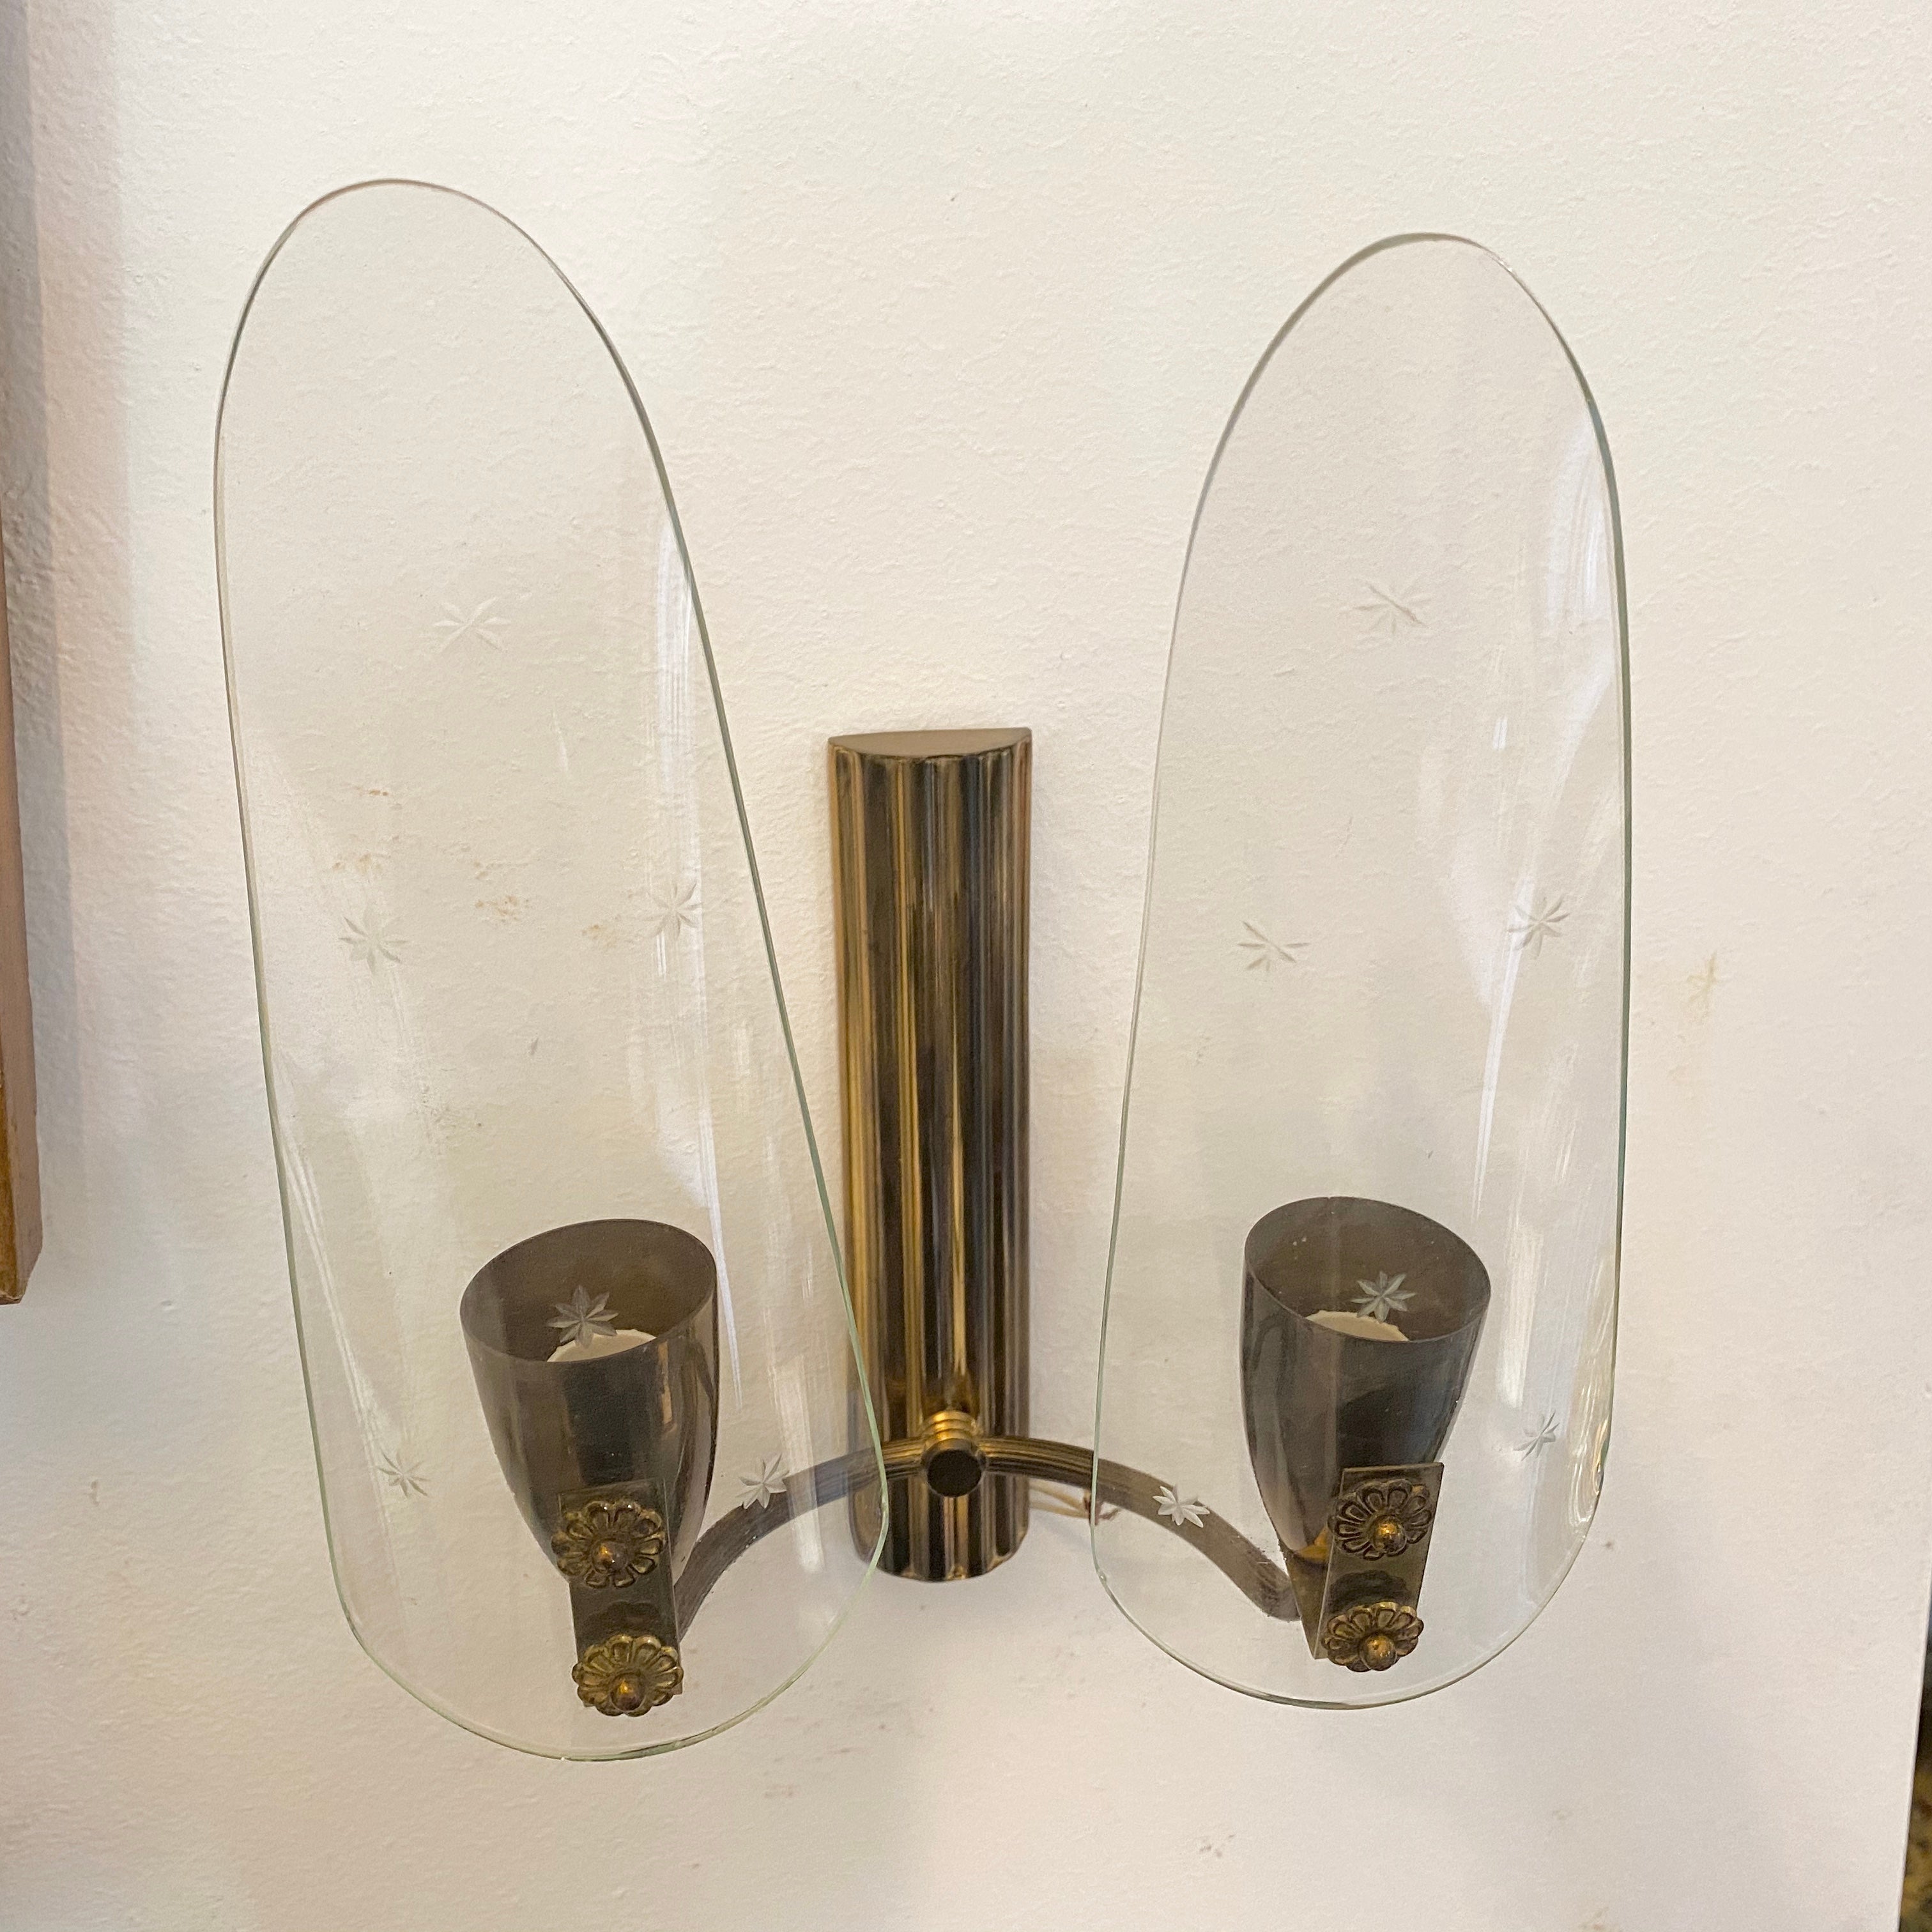 Particular two-light wall sconces in the manner of Pietro Chiesa, brass it's in original patina, glasses are hand engraved and in perfect conditions. They work 110-240 volts and need two regular e14 bulbs. Three sconces available, price is for one